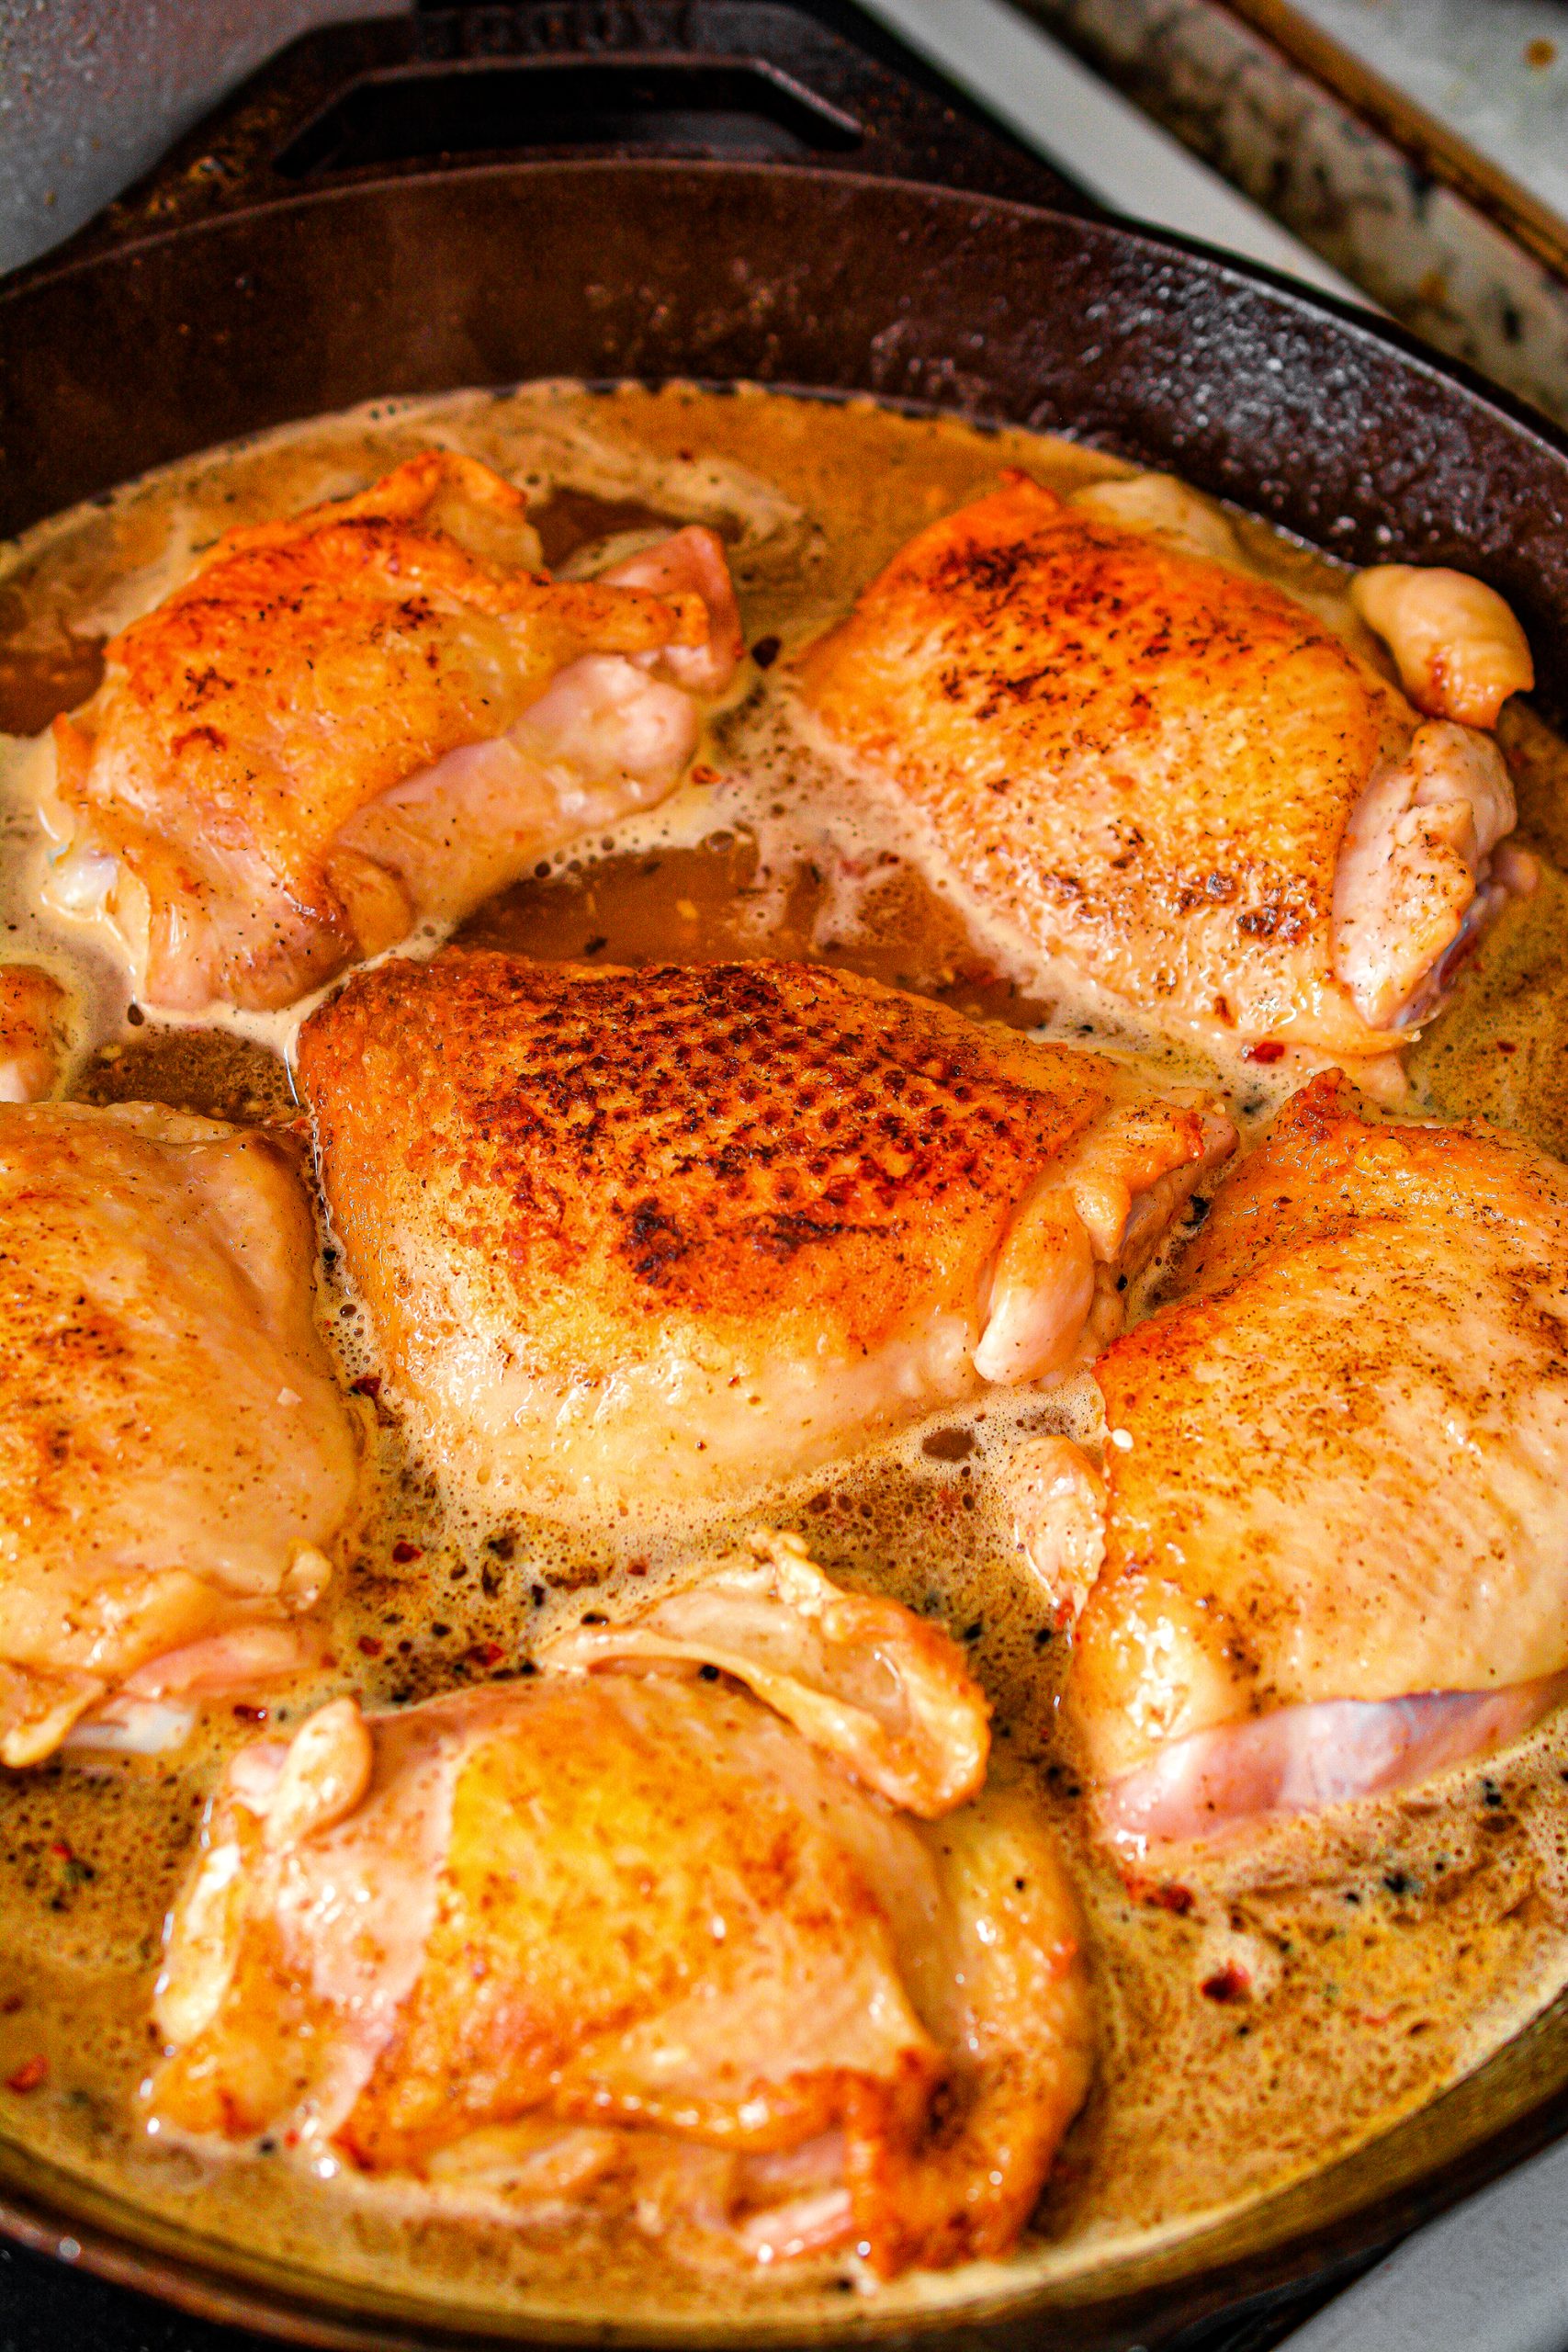 Return the chicken to the skillet along with the thyme, orange slices, and onion.